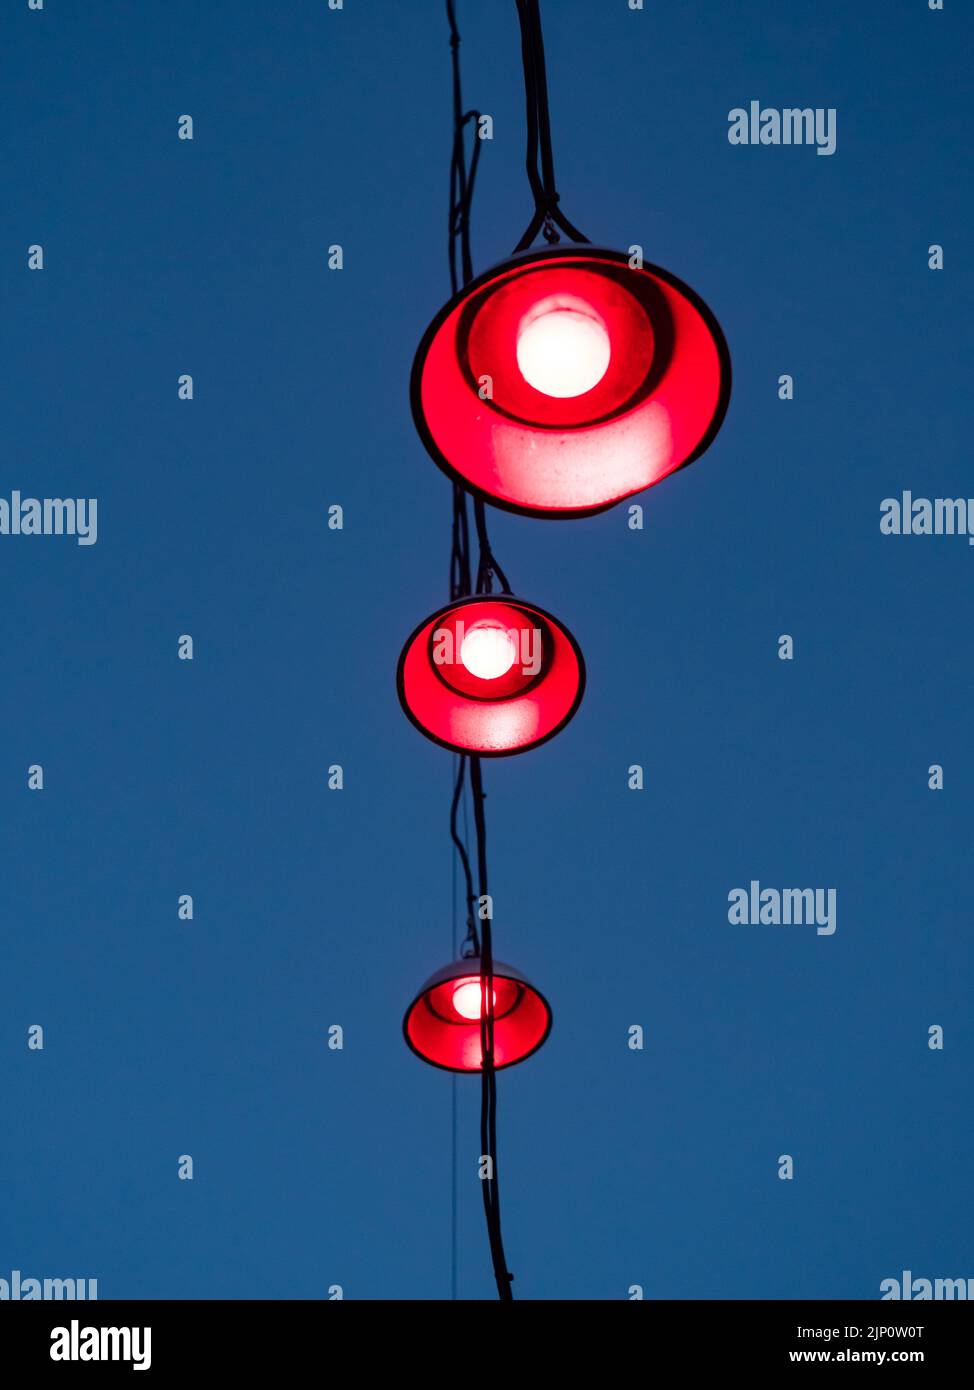 Three lamps hanging on cables in front of a blue evening sky. Red light is shining out of the light bulbs. An abstract scene with red street lights. Stock Photo